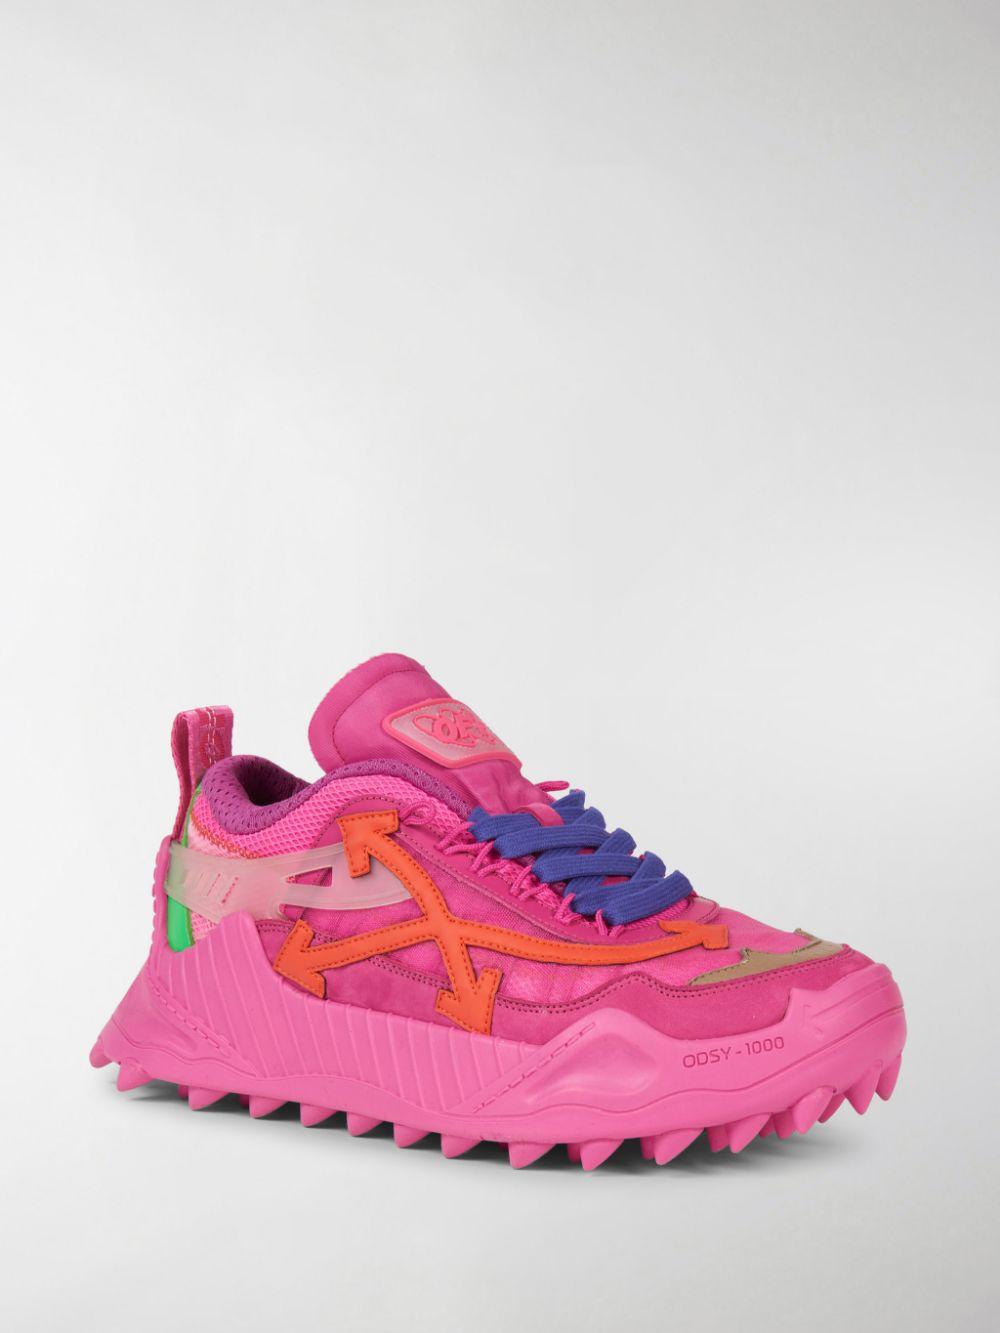 Off-White c/o Virgil Abloh Odsy-1000 Sneakers in Pink - Lyst